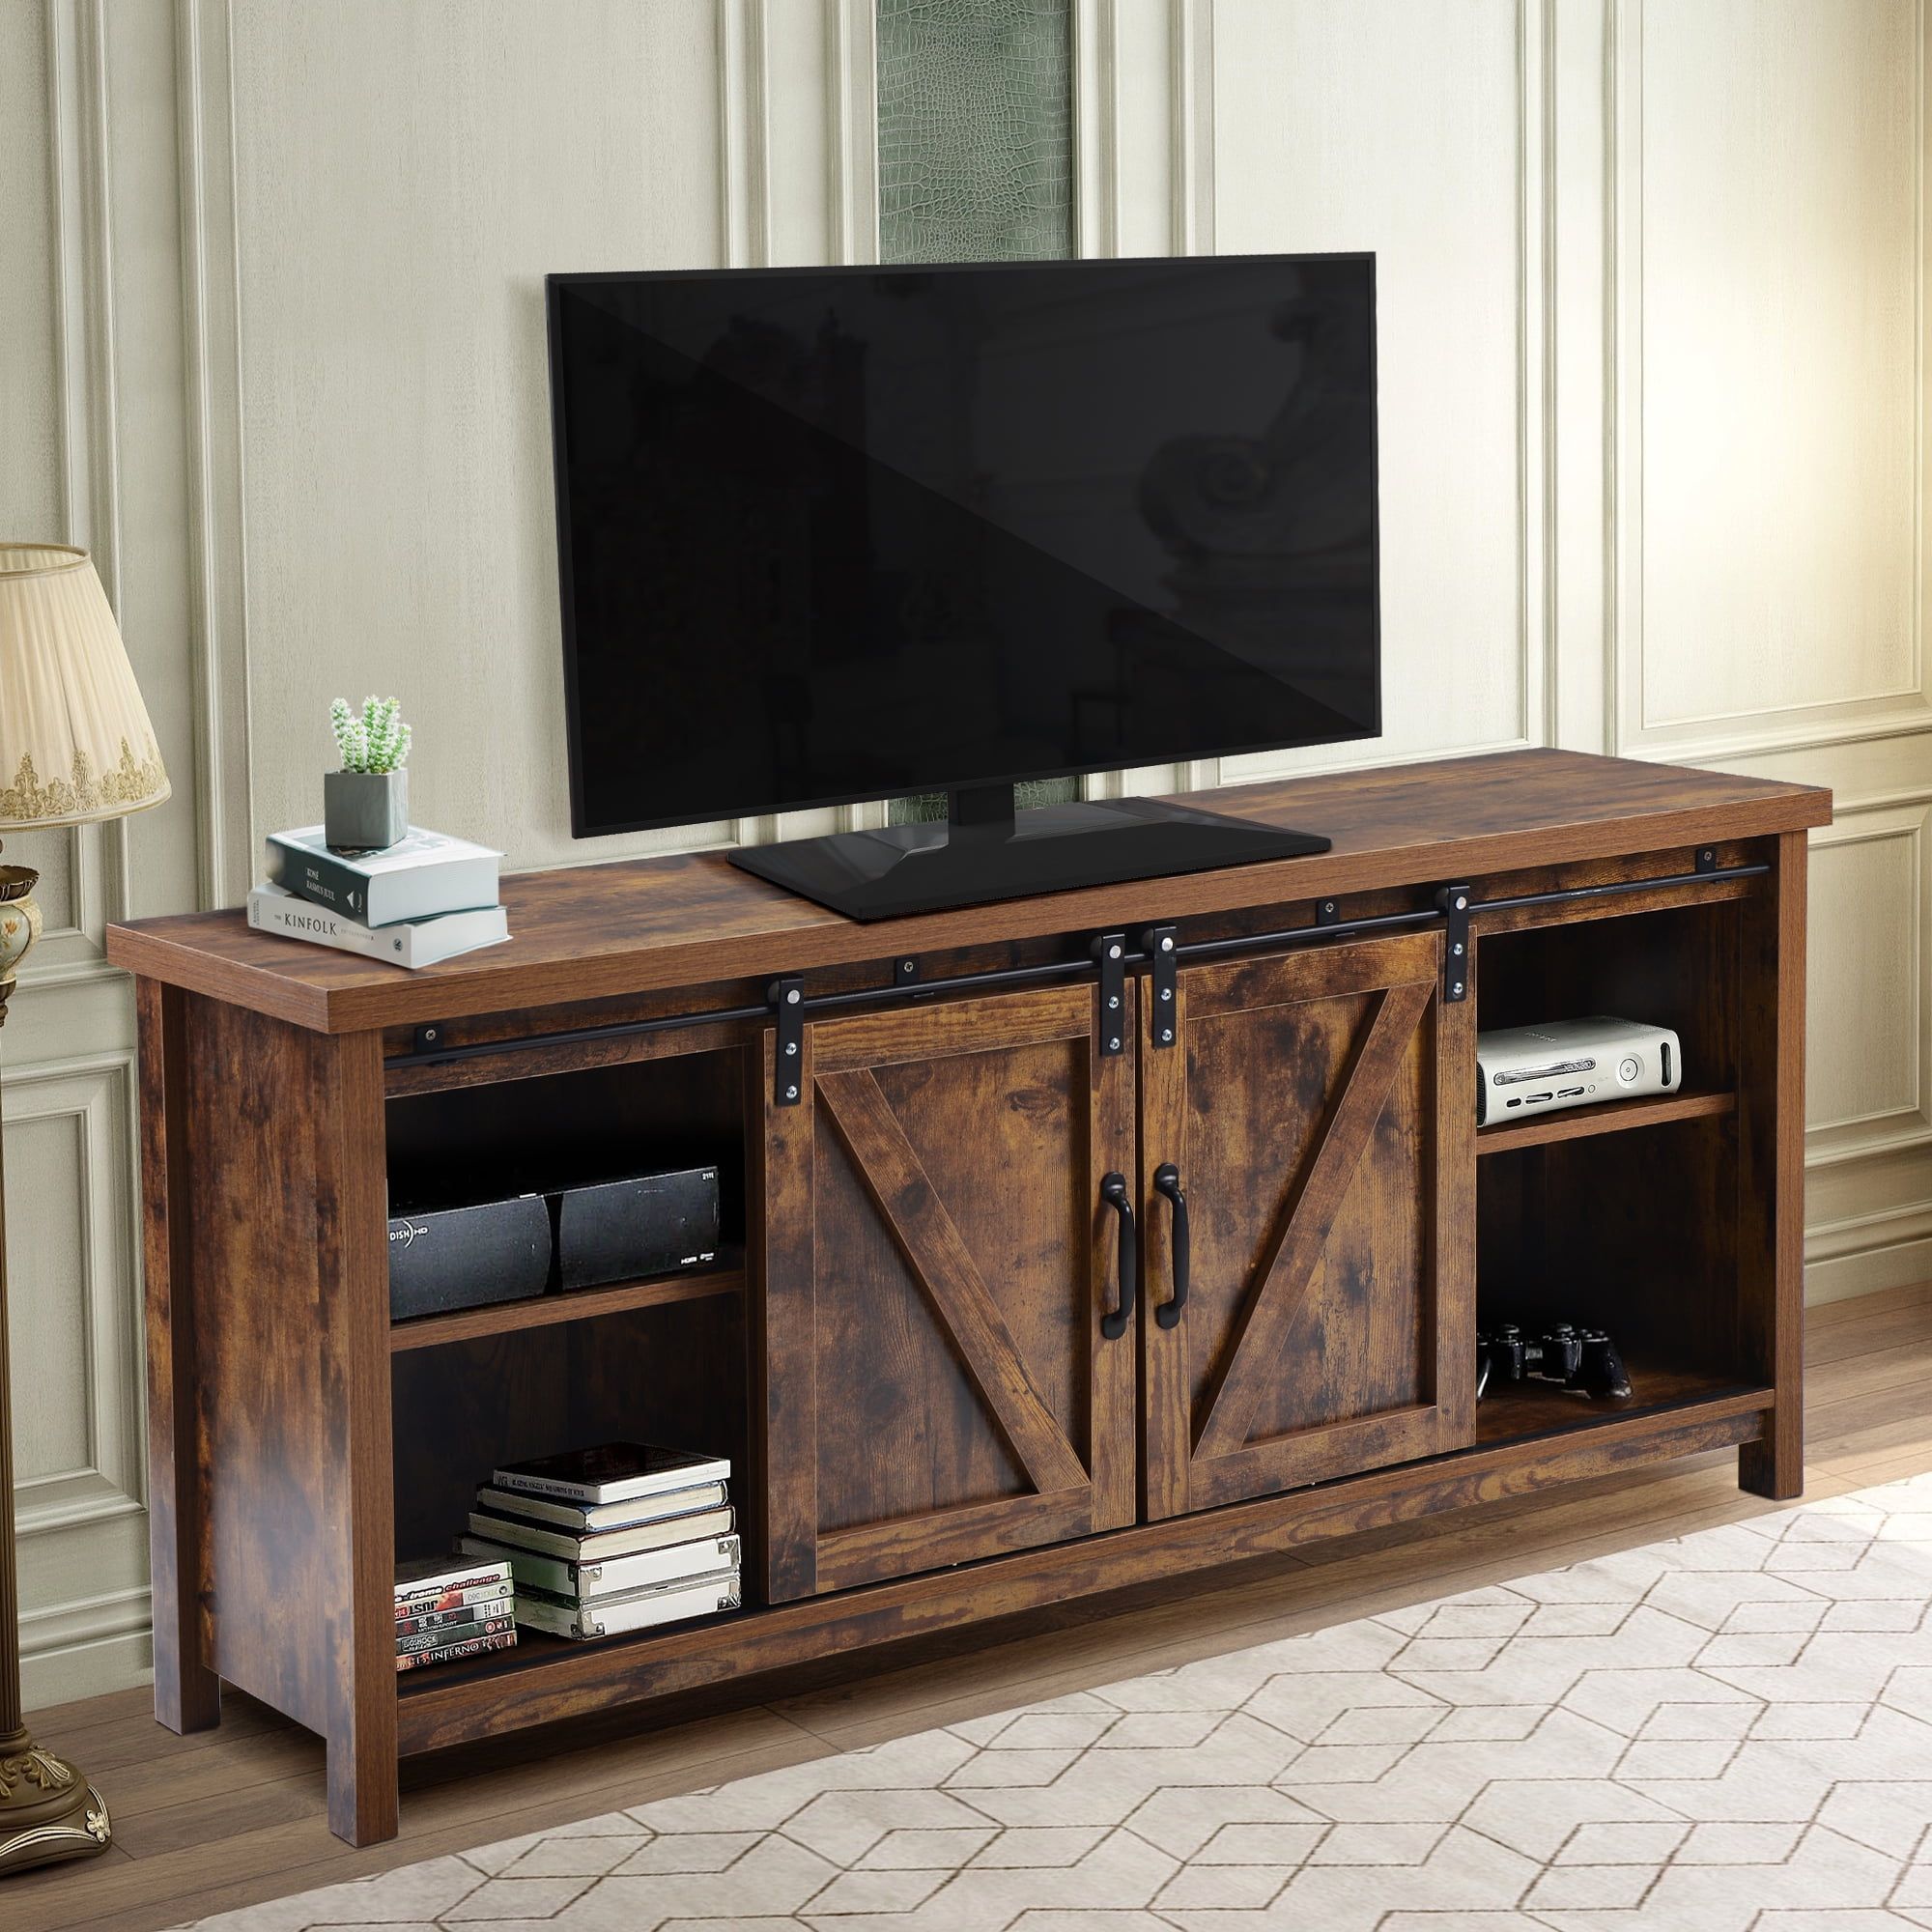 Farmhouse Universal Tv Stand For Tv's Up To 60" Flat Screen, Tv Cabinet With Regard To Farmhouse Stands With Shelves (Gallery 11 of 20)